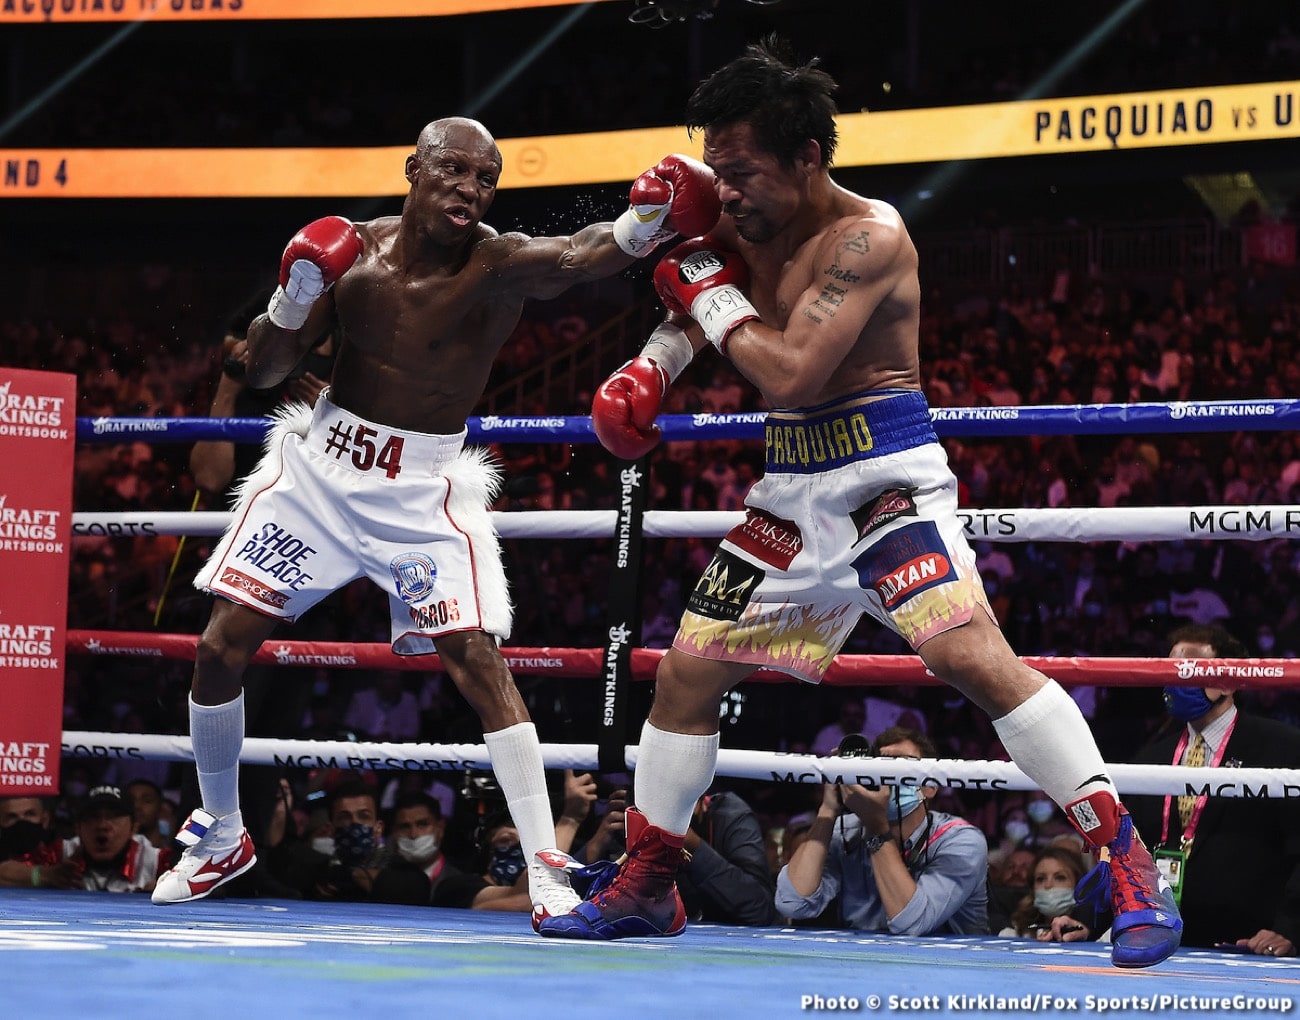 Manny Pacquiao is not done - says Max Kellerman